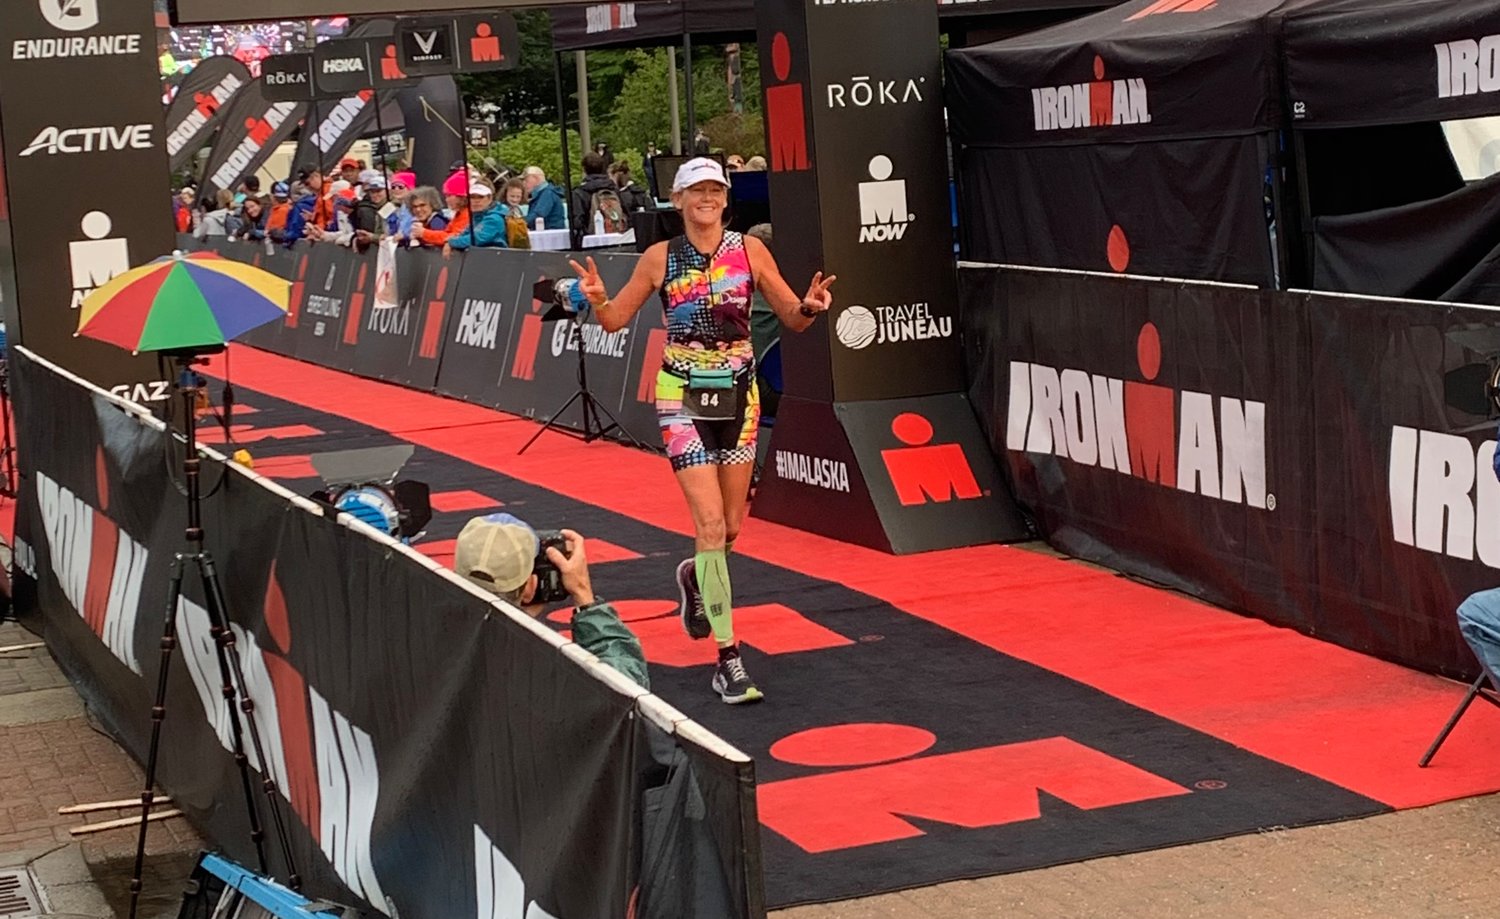 Linda Johnson crosses the finish line during the Alaska Ironman 2022 to qualify for the World Championships in Kona, Hawaii.